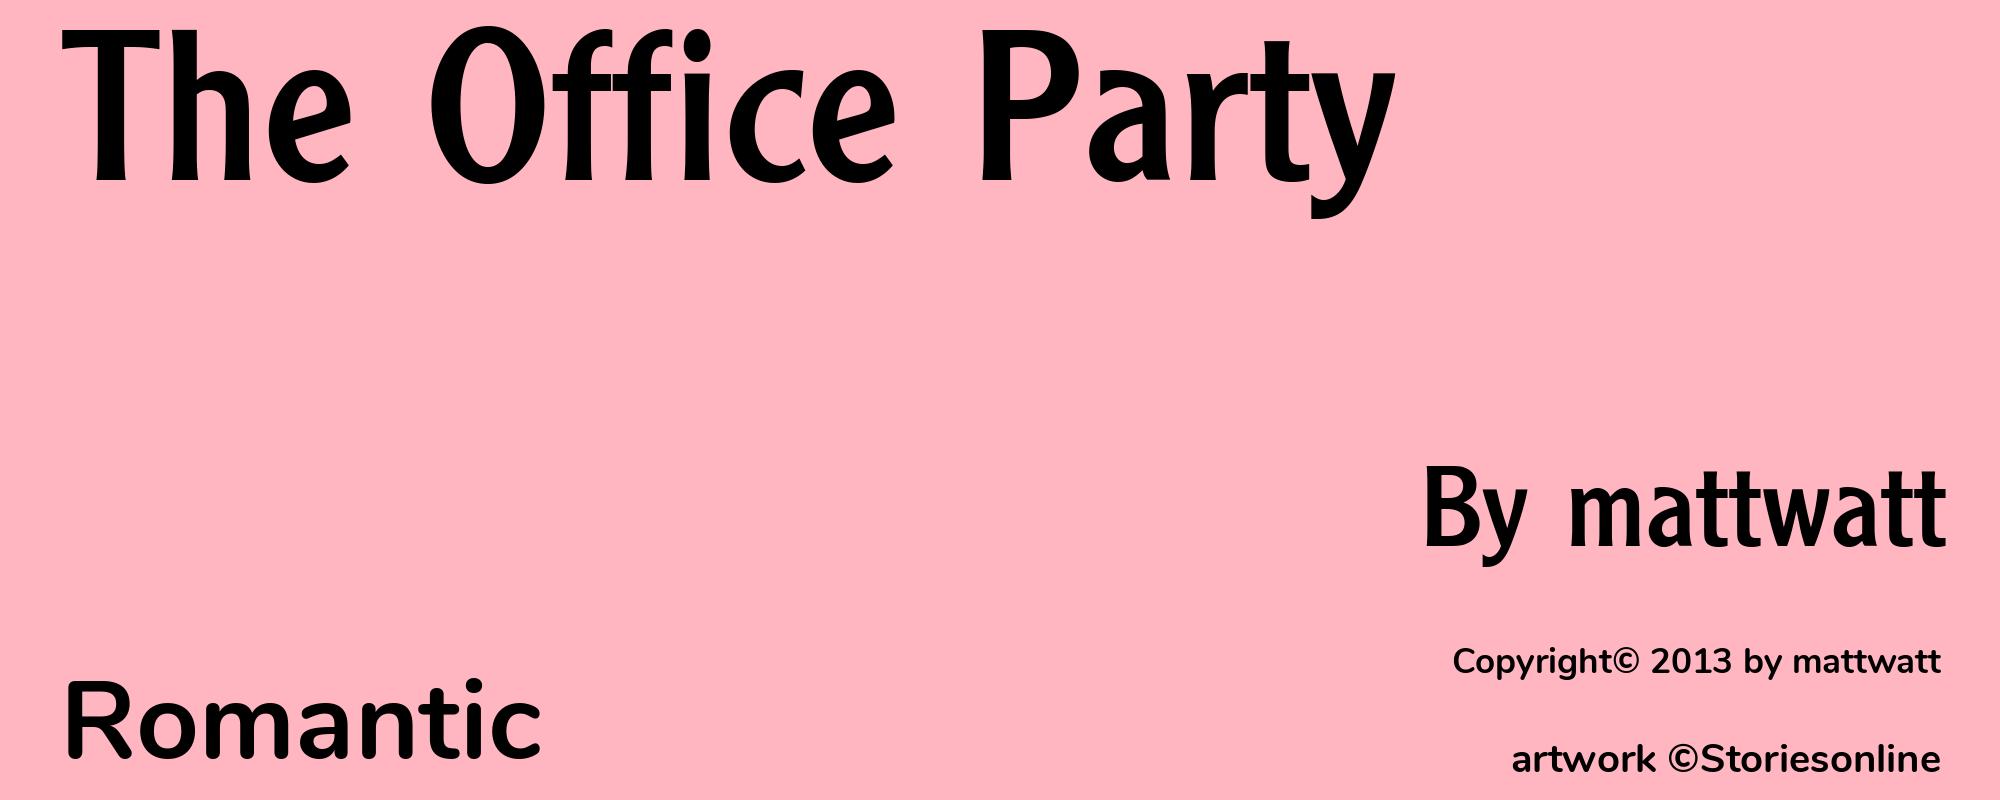 The Office Party - Cover